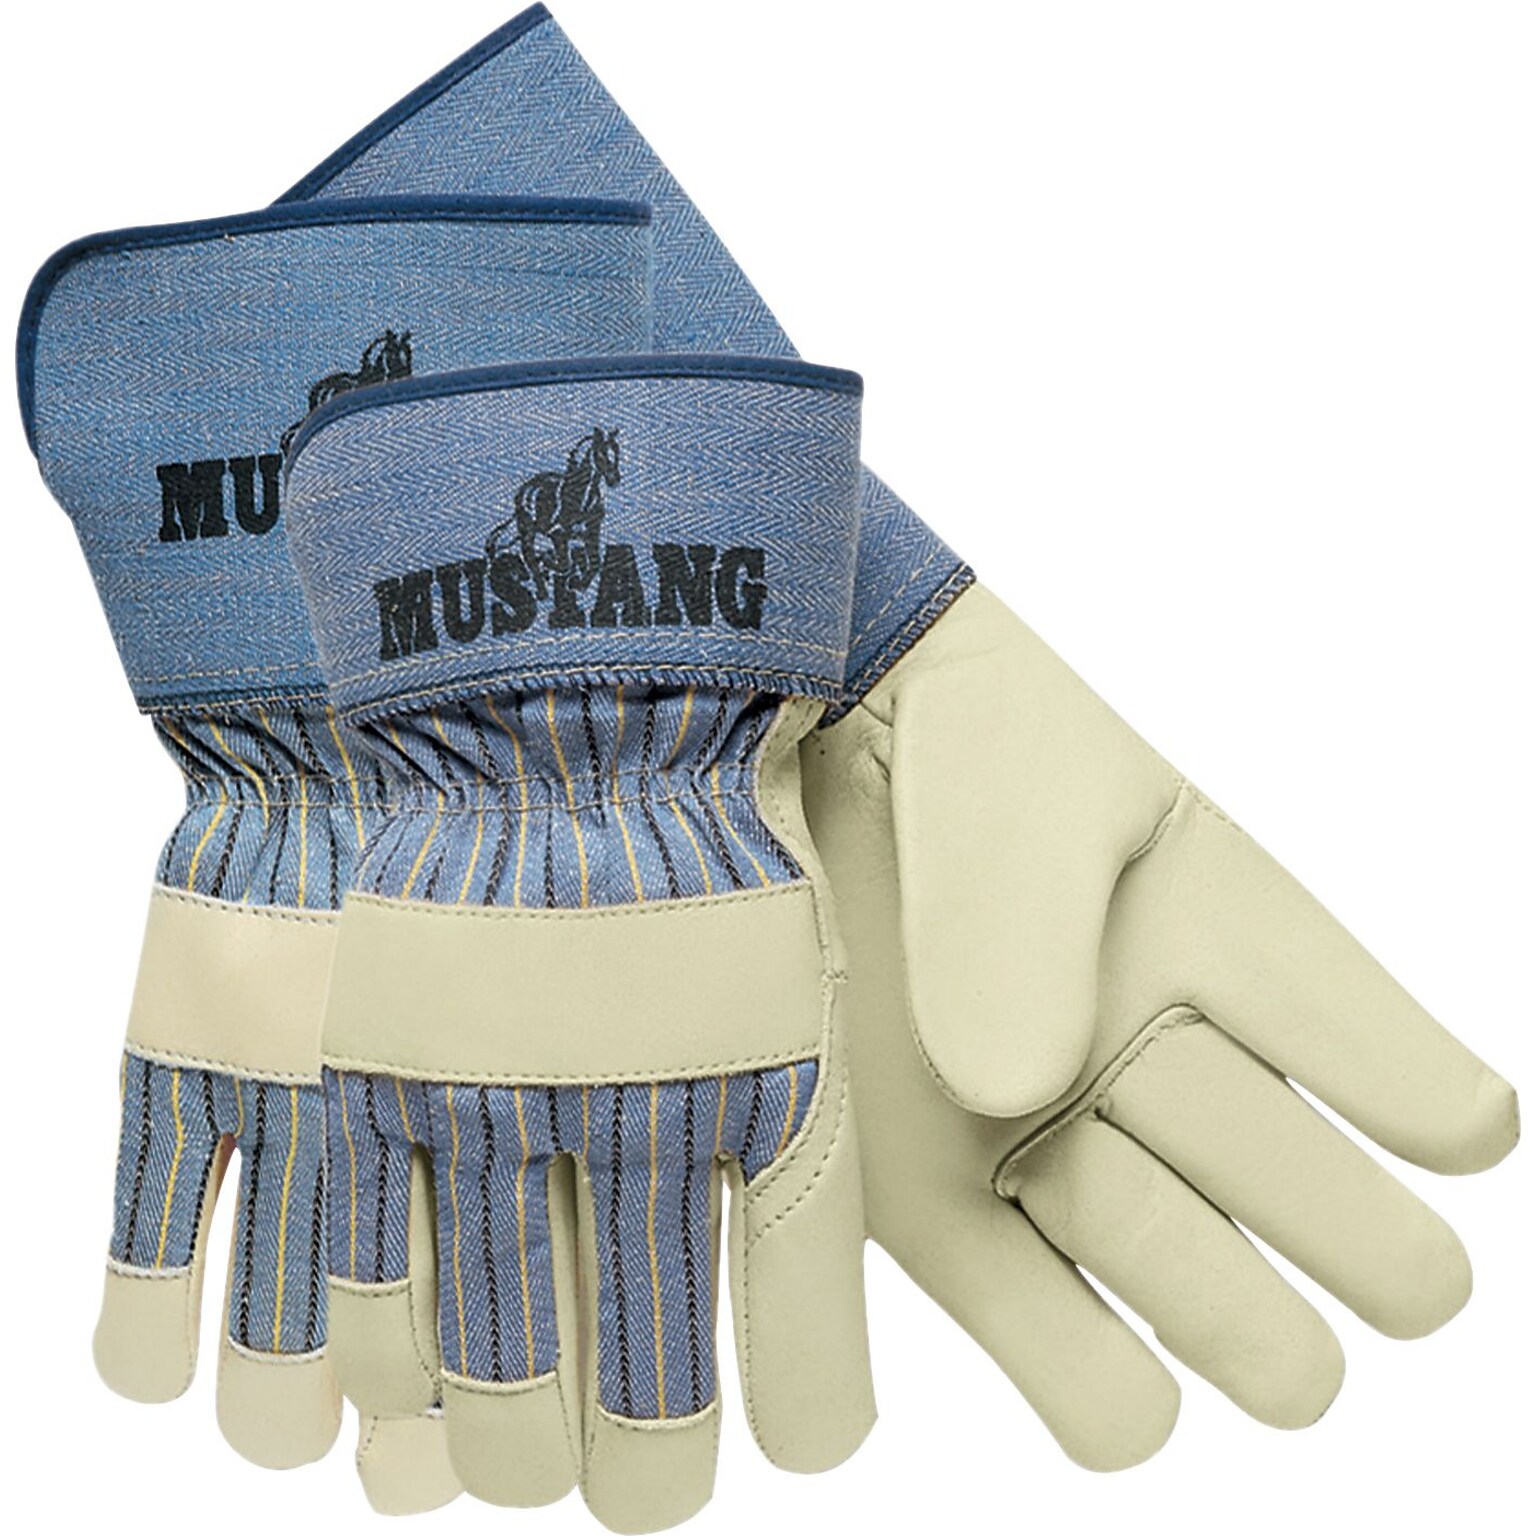 Memphis Gloves Mustang Palm Work Gloves, Cowhide Leather, Safety Cuff, White, X-Large, 12 Pair/Box (1935M)